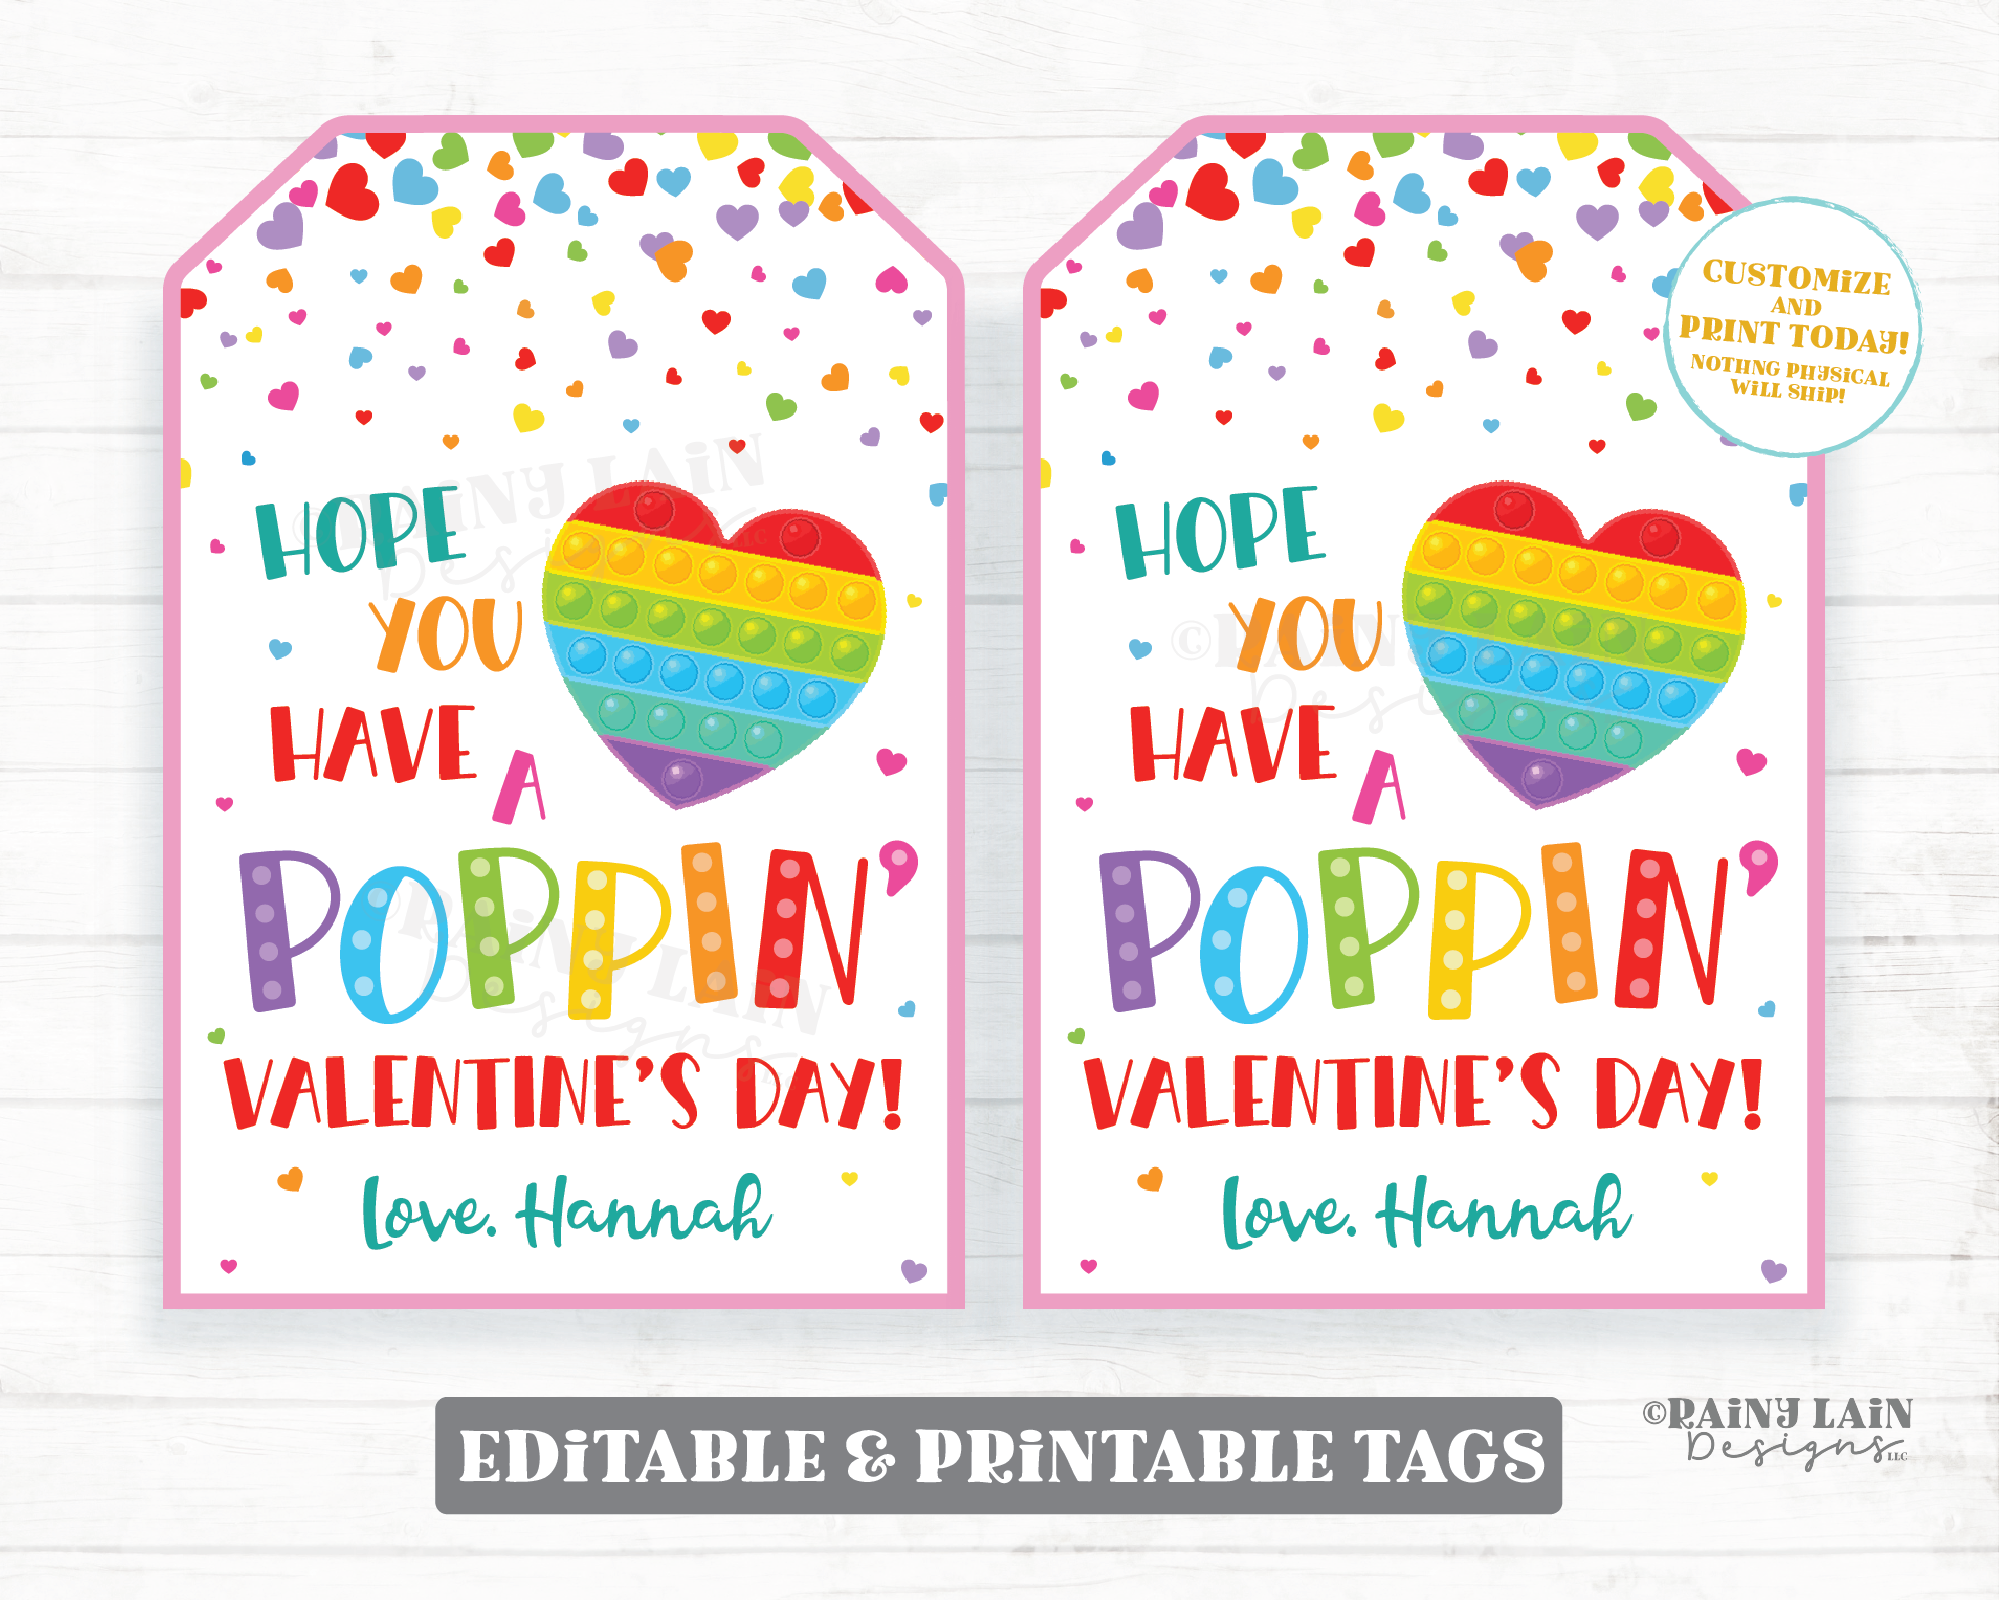 hope-you-have-a-poppin-valentine-s-day-tag-pop-fidget-toy-popping-gif-rainy-lain-designs-llc